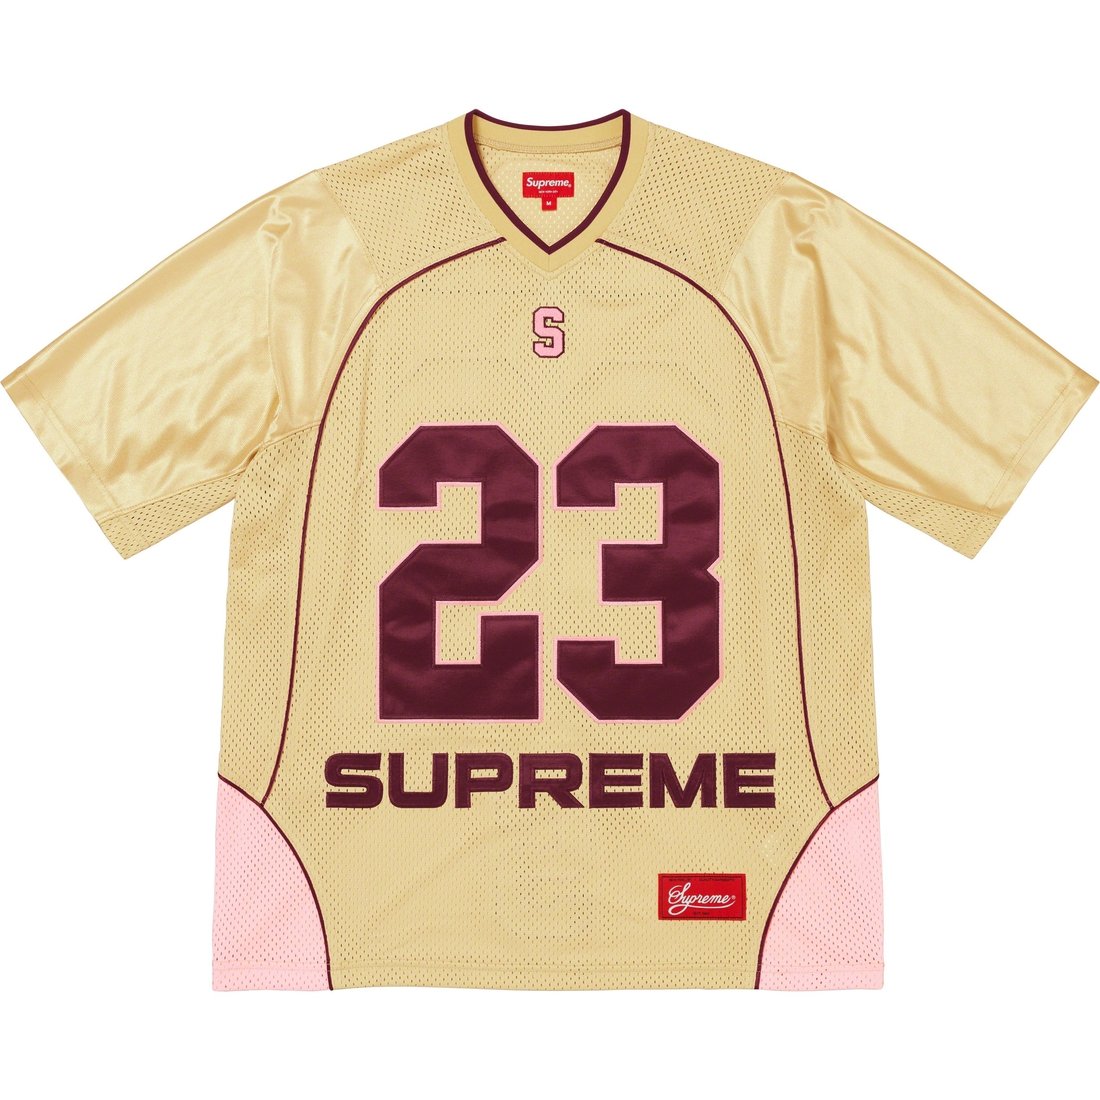 Details on Perfect Season Football Jersey Gold from spring summer
                                                    2023 (Price is $118)